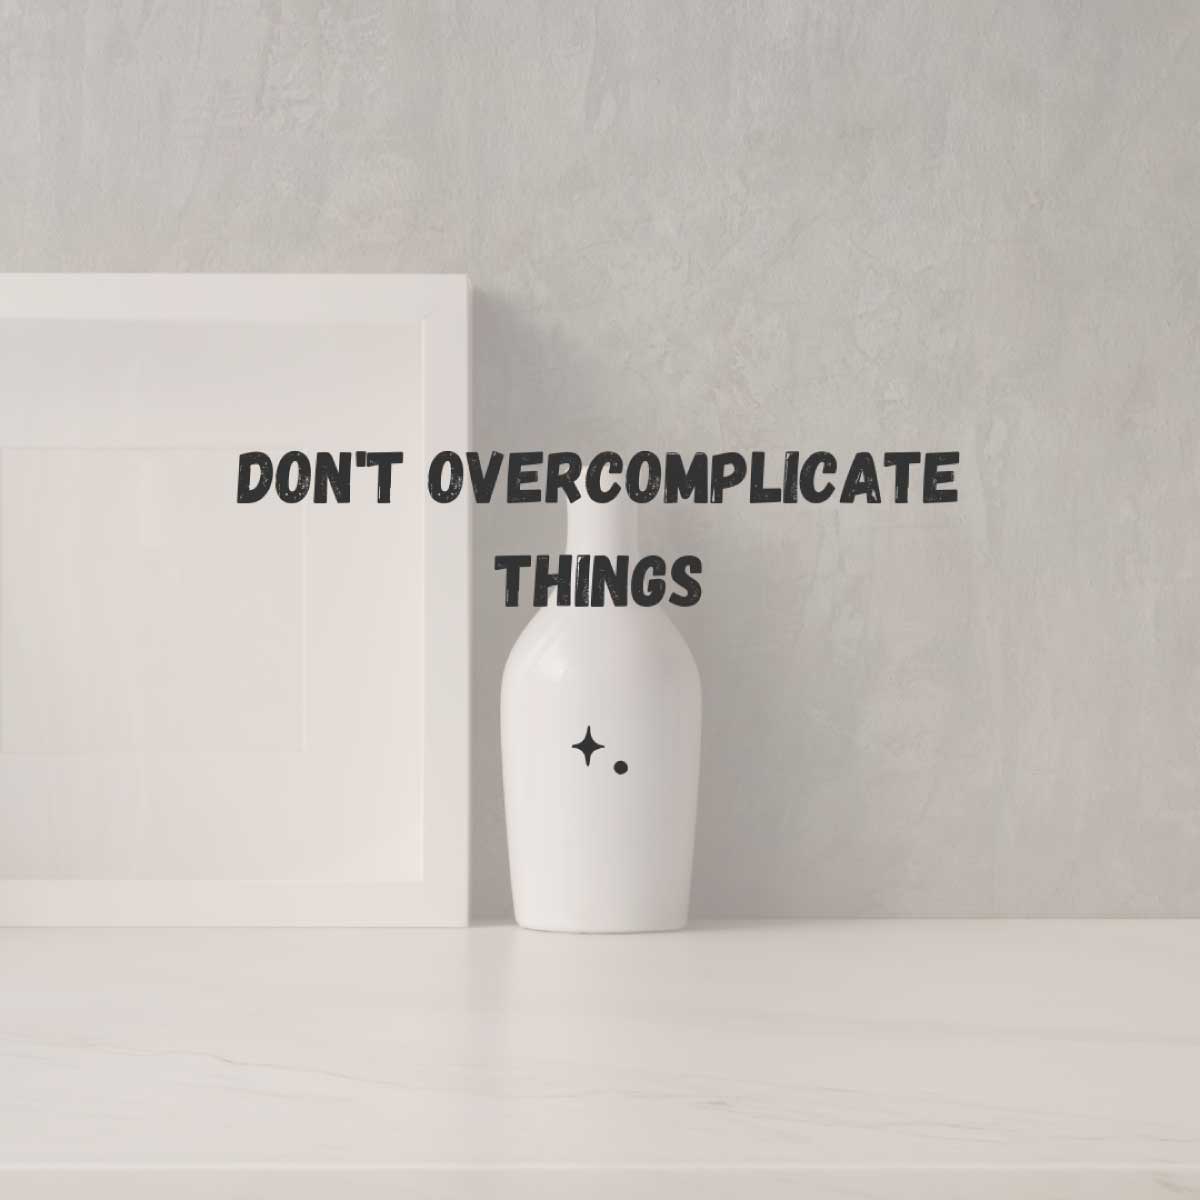 don't overcomplicate things. A white vase and white picture frame on a table by themselves to show simplicity.